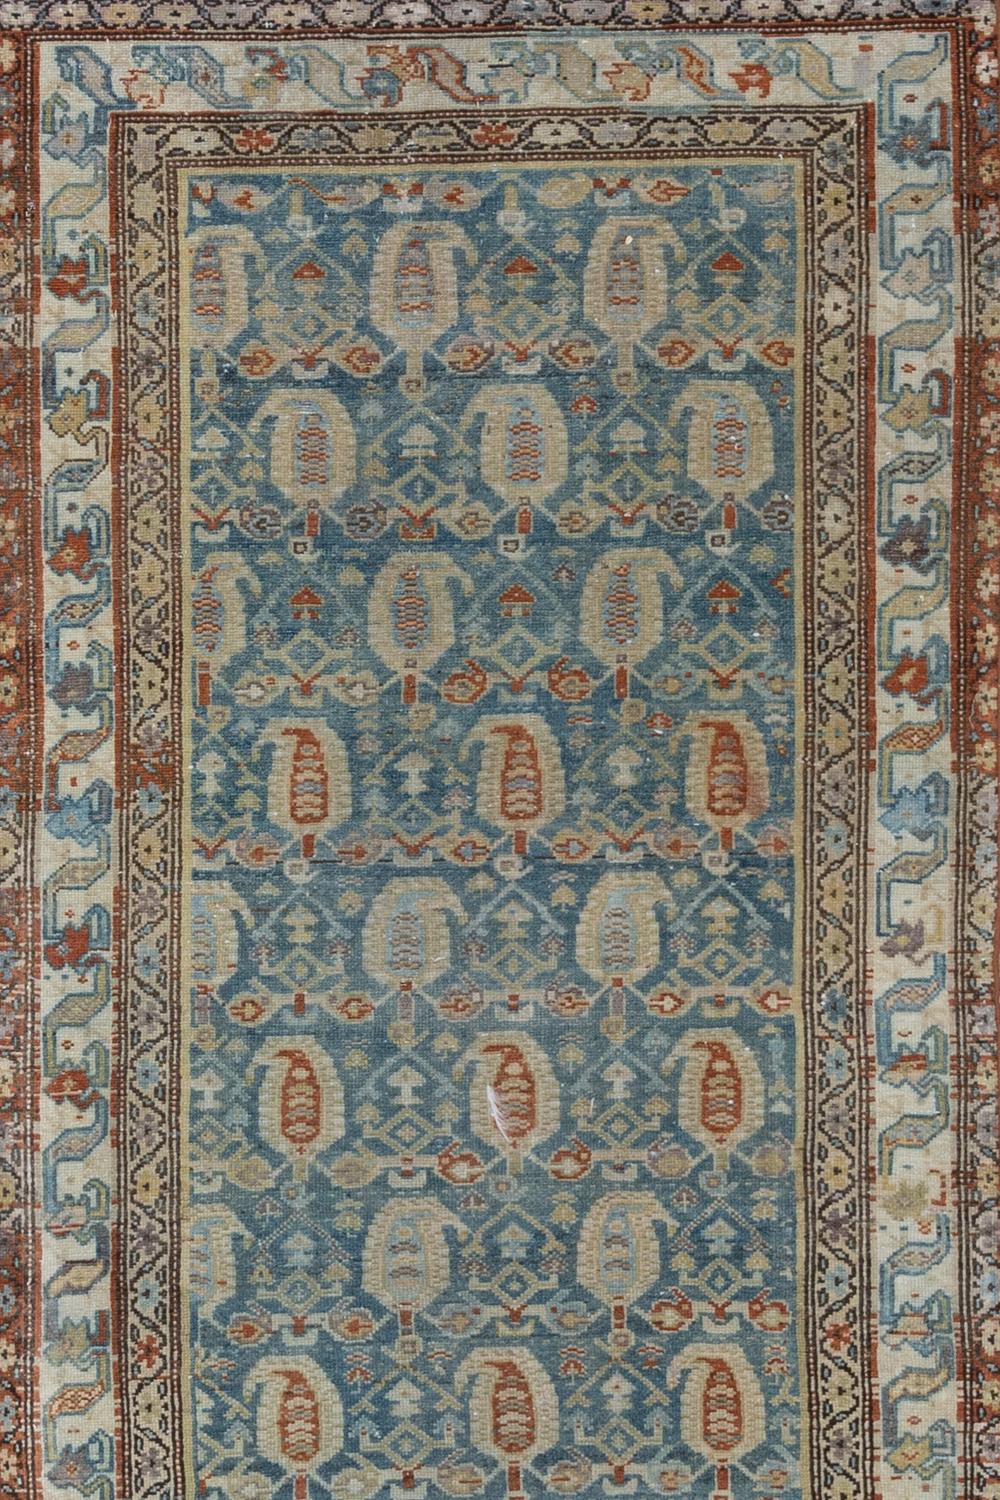 Antique Malayer Runner

Circa 1920

Pile: Low

Good condition. Beautiful vibrant blue field with a large scale boteh pattern in beige and rust. 

Wear notes: none

Wear Guide:
Vintage and antique rugs are by nature, pre-loved and may show